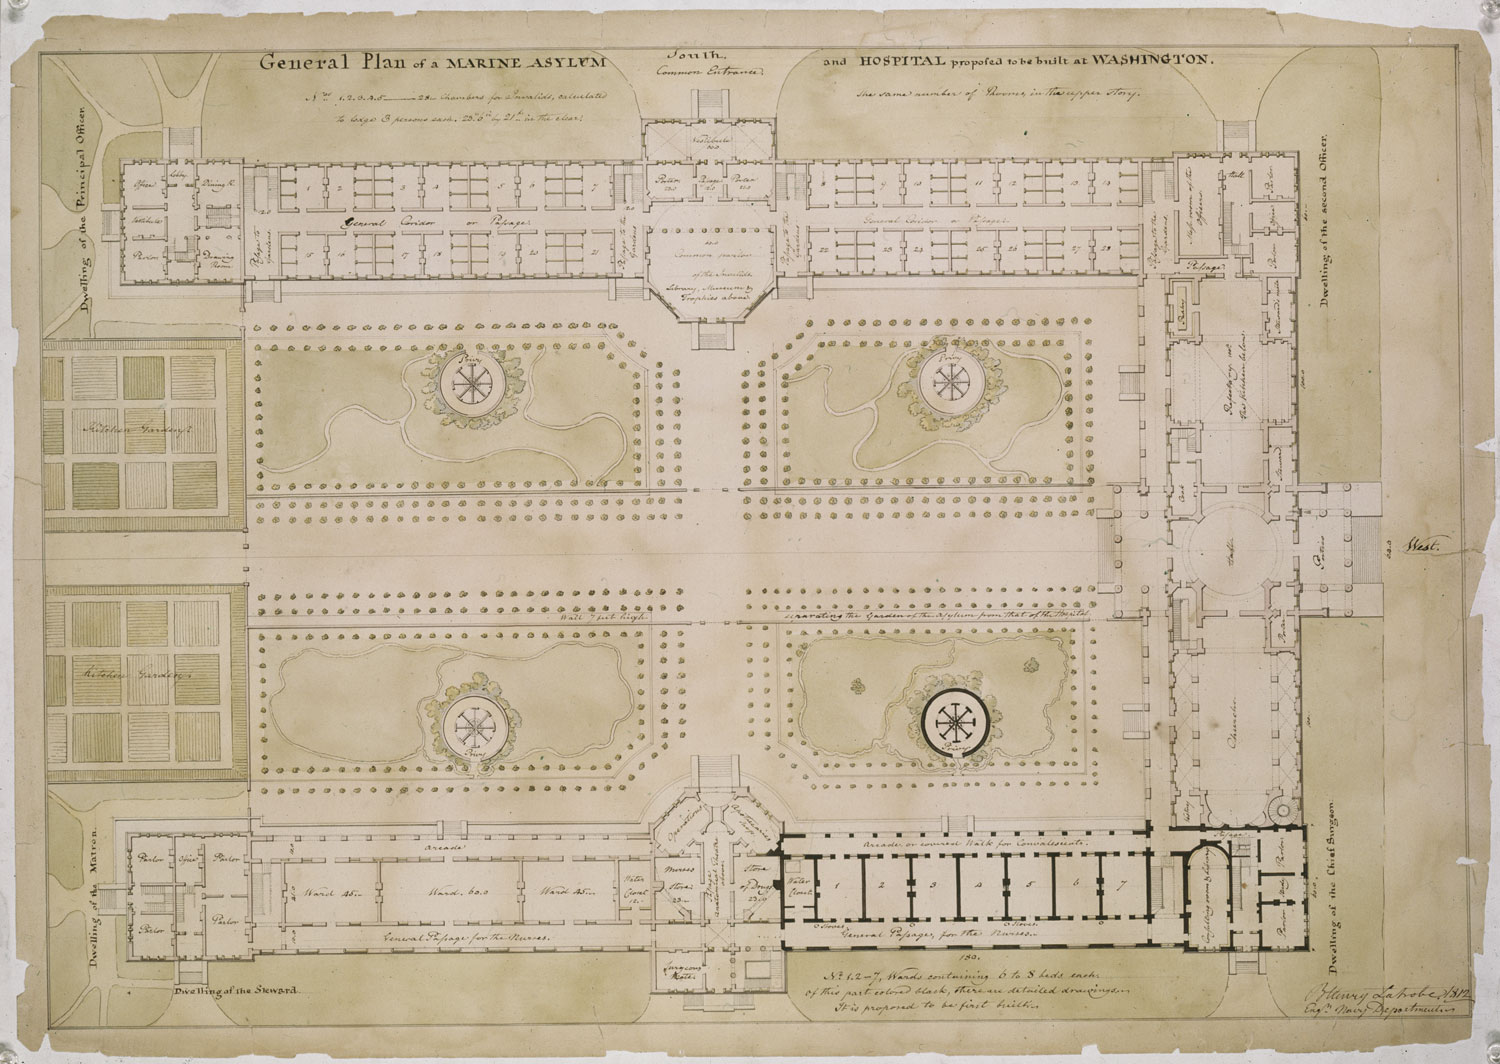 Fig. 1, Benjamin Henry Latrobe, General Plan of a Marine Asylum and Hospital proposed to be built at Washington, 1812. Kitchen gardens are indicated on the far left of the plan.